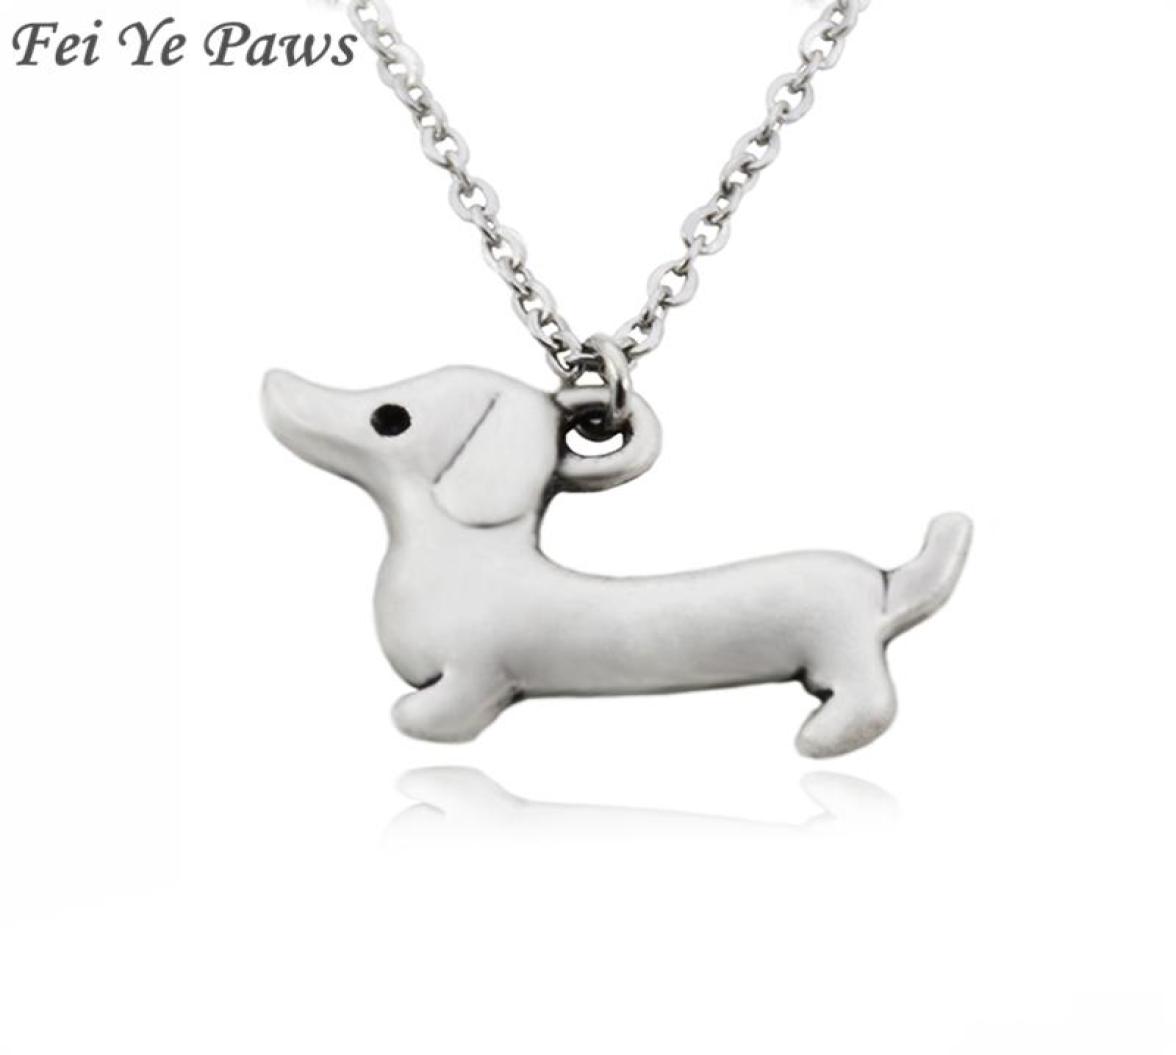 

Fei Ye Paws Stainless Steel Long Chain Happy Dachshund Sausage Dog Choker Necklace Pendant Collar Animal Jewelry For Women Girl Ch7901944